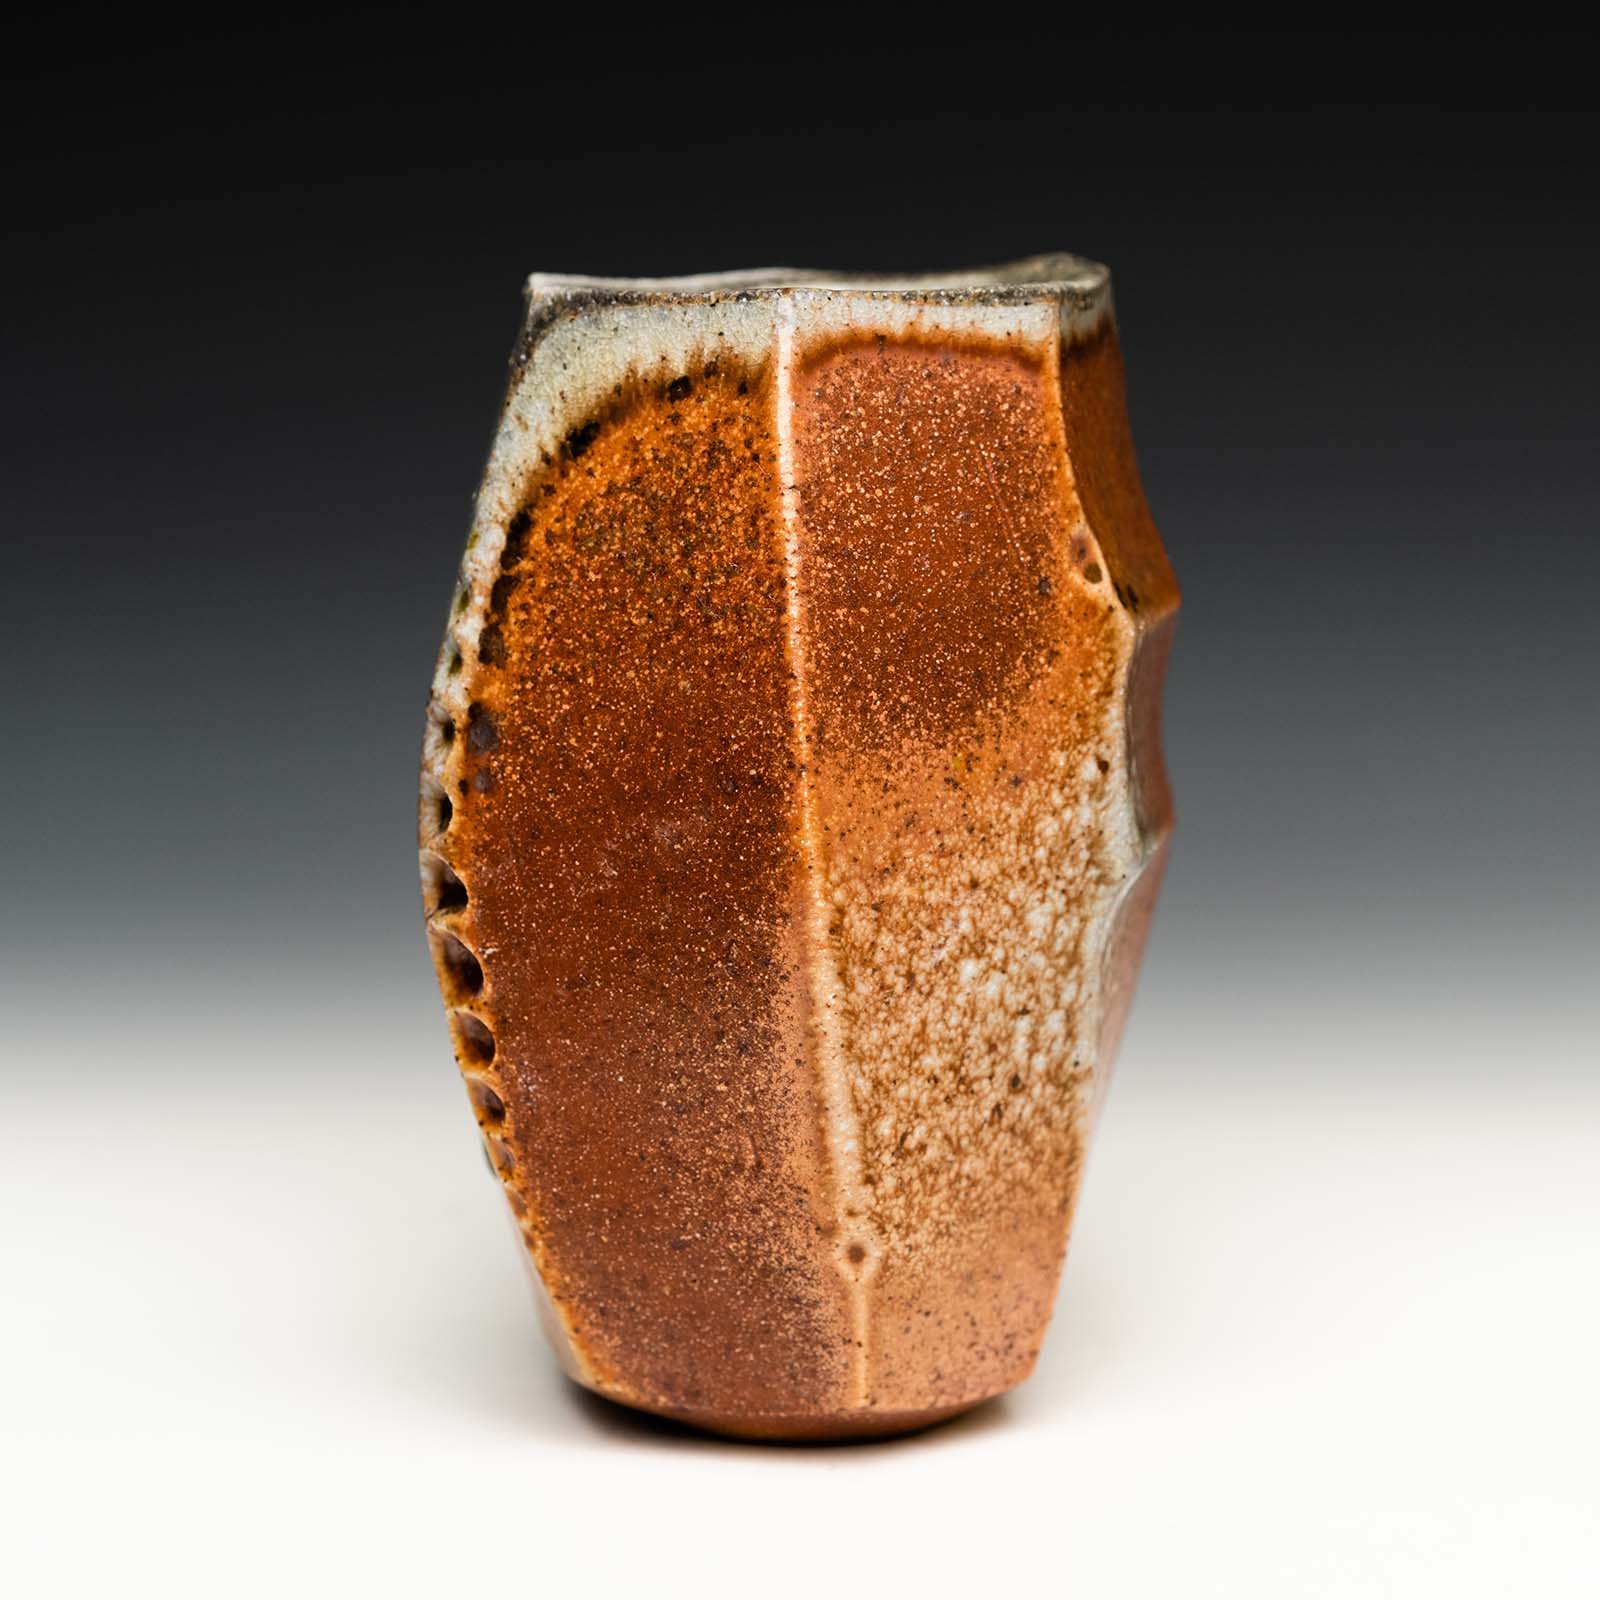 Alex Olson, yunomi, 5 in. (13 cm) in height, B-mix clay with grog, shino liner glaze, wood fired to cone 10 in reduction, 2021.